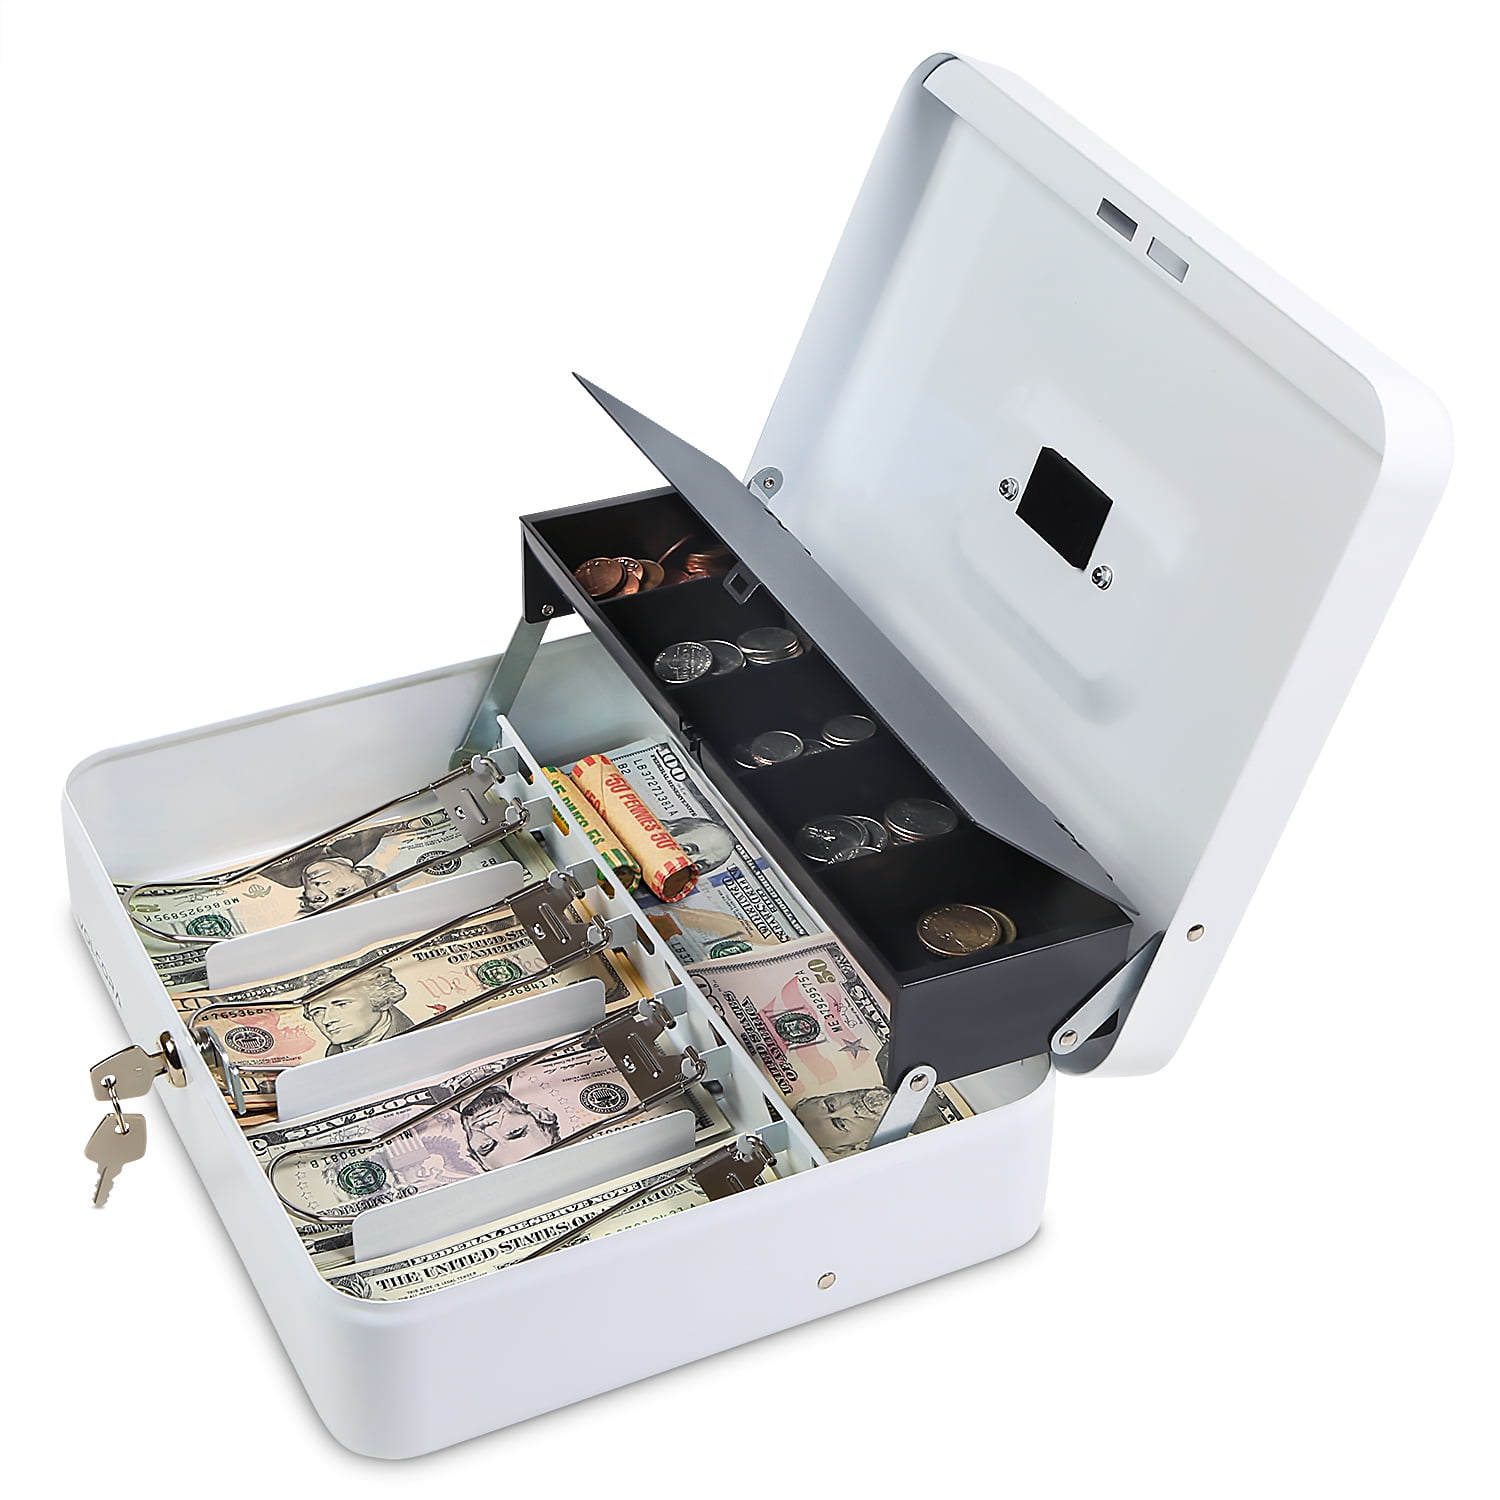 Fundraiser Petty Cash Metal Lockable Storage Box for Change Portable and Compact 2 Keys Tiered Money Coin Tray and Bill Slots Garage Sale Black Steel Cash Box with Safe Key Lock